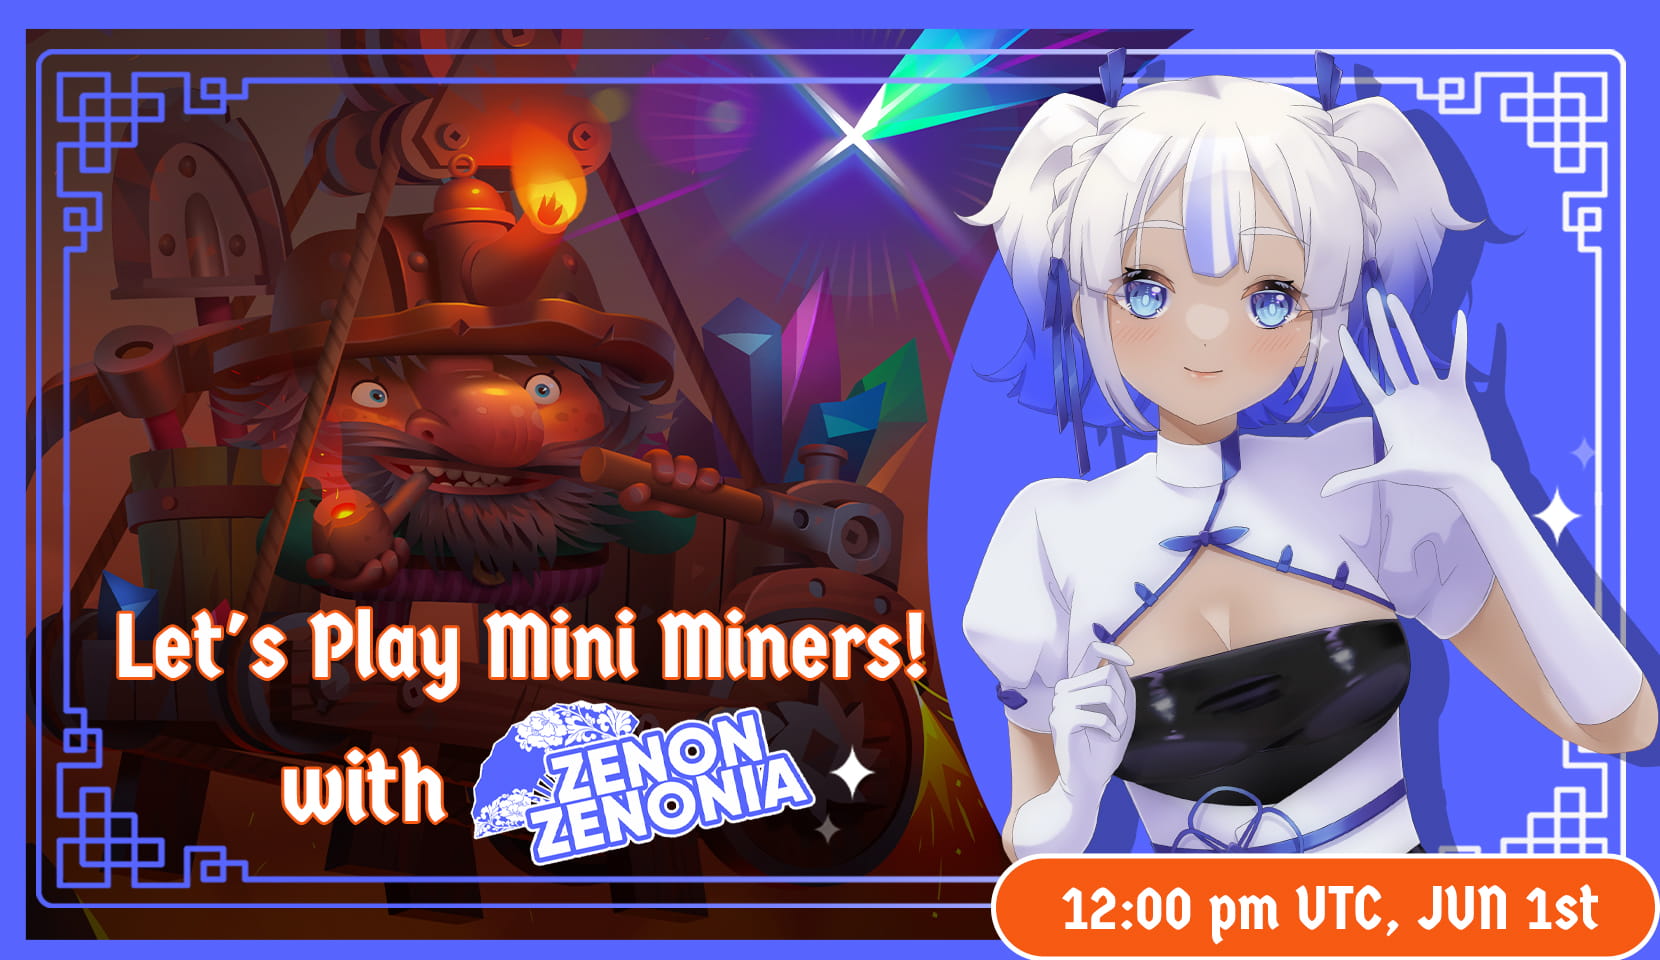 Let's Play Mini Miners with Zenon! 